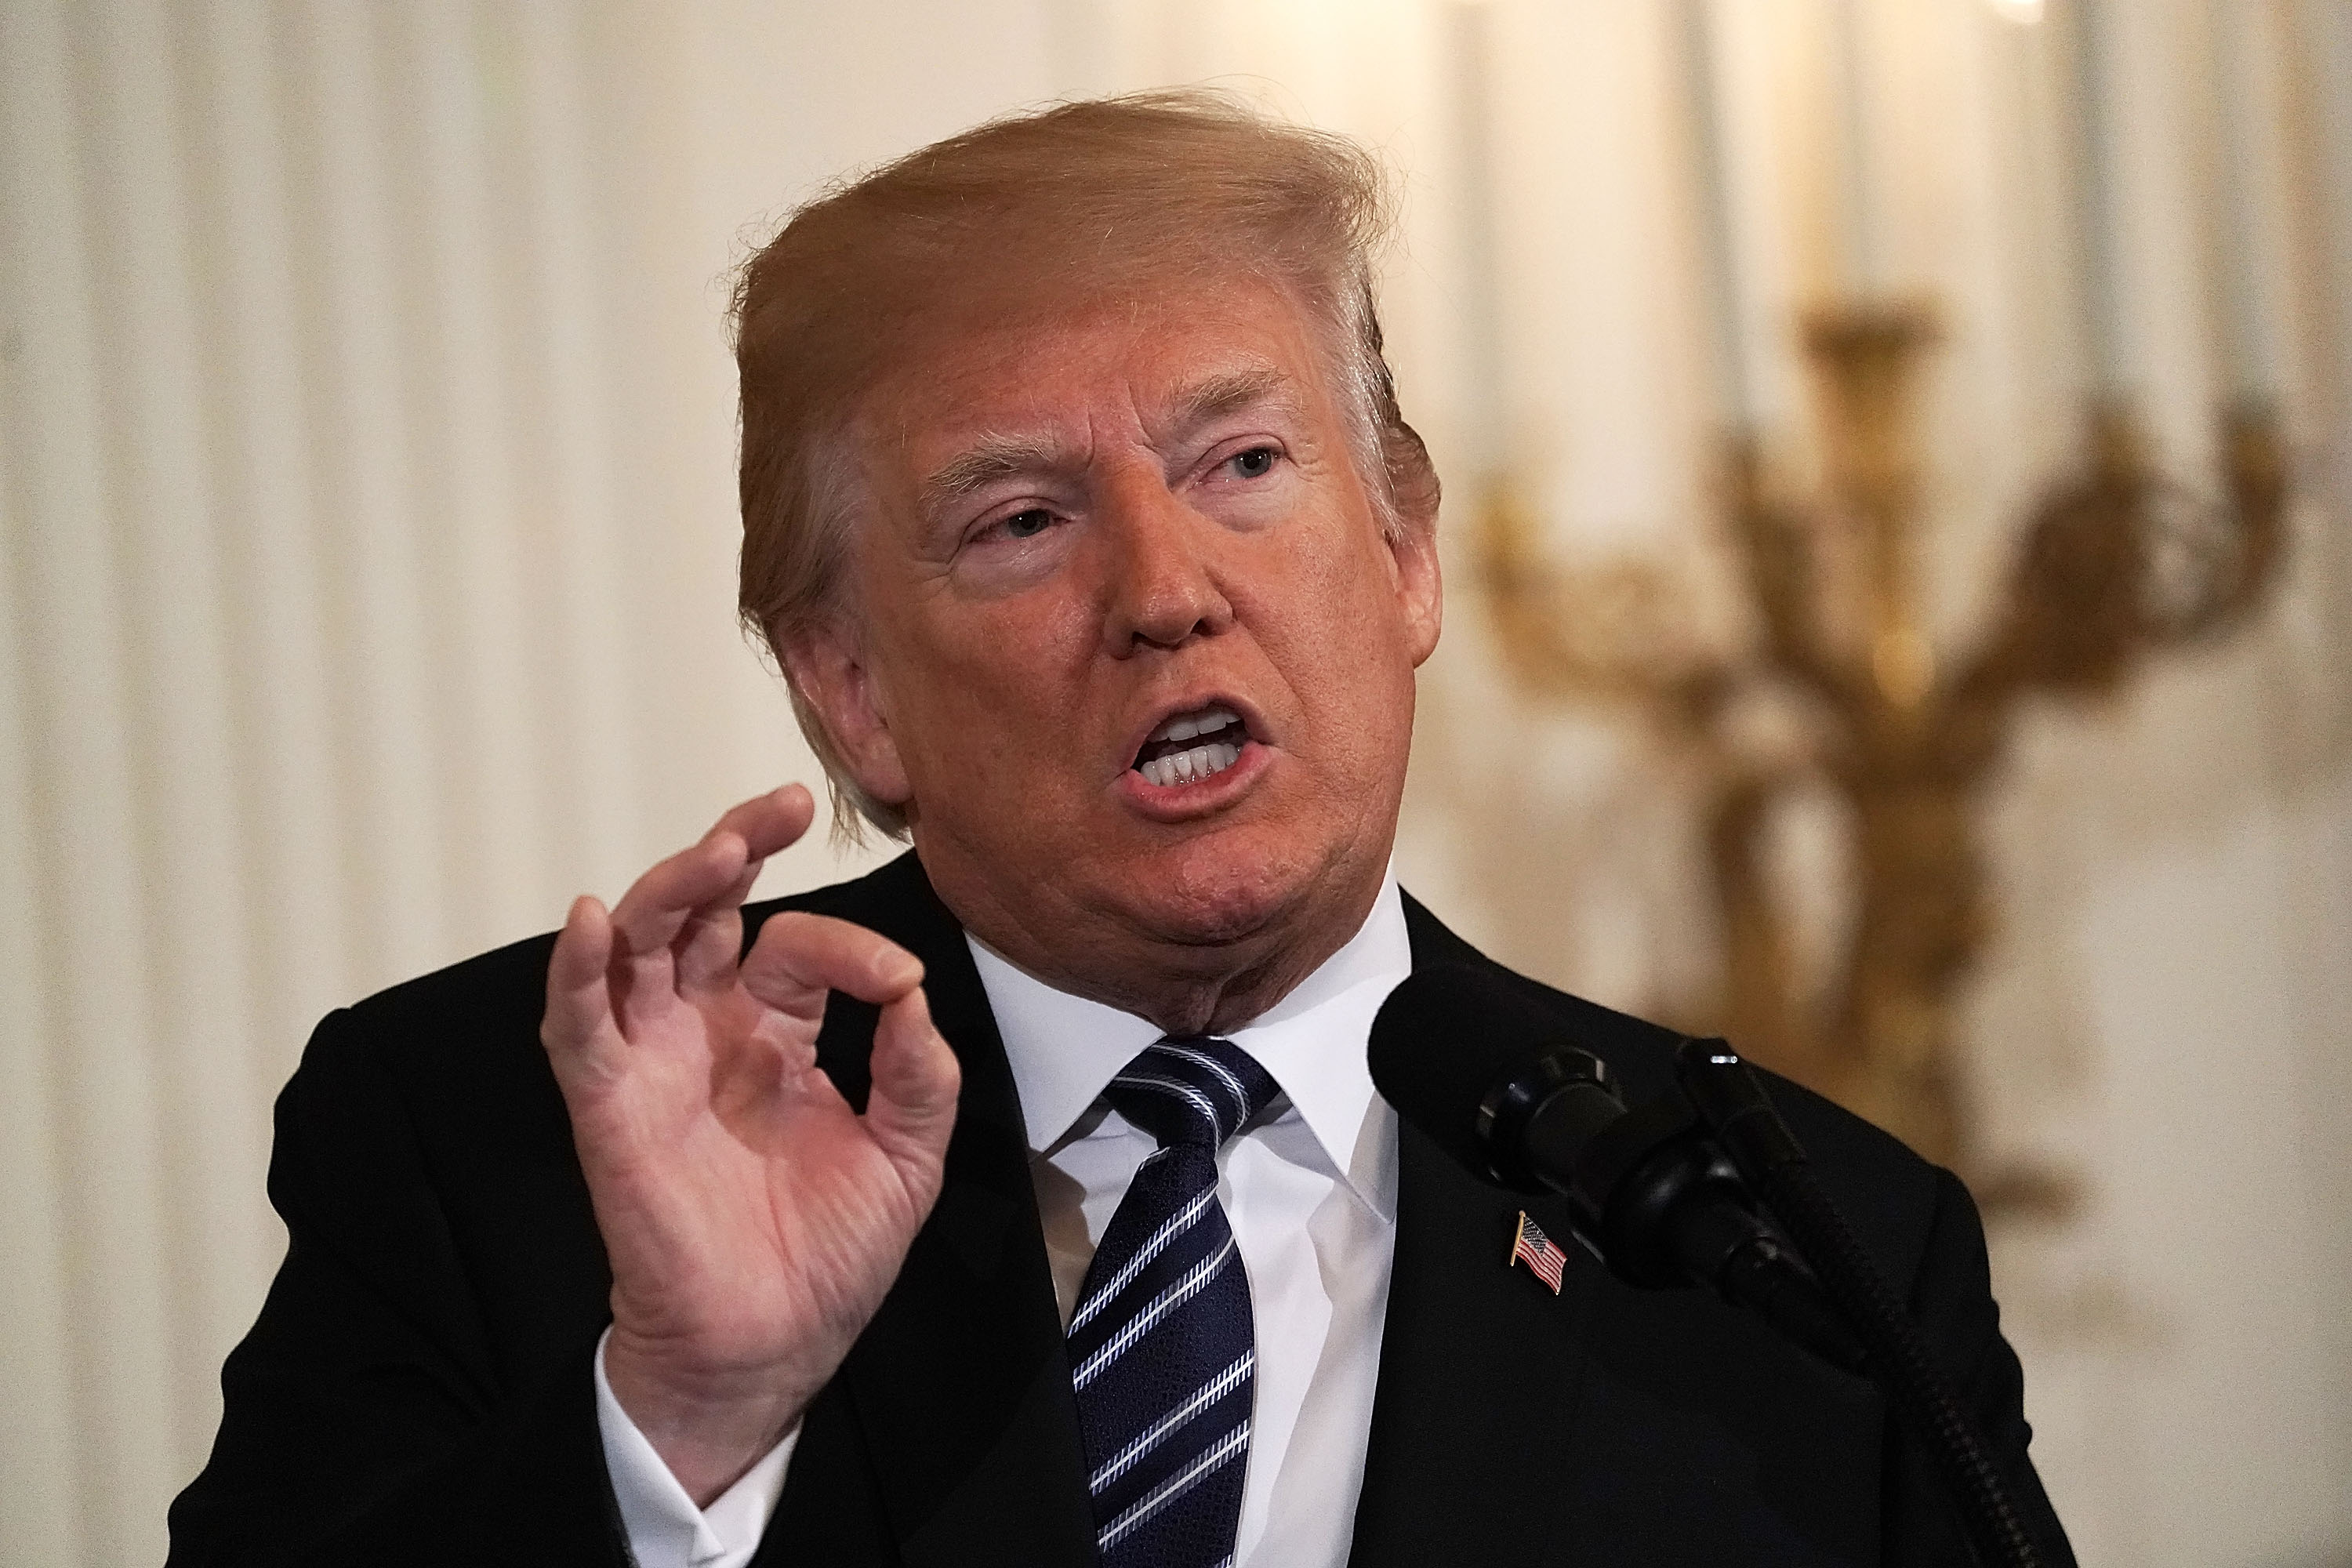 President Trump speaks at the White House in Washington, D.C. on May 18, 2018. (Alex Wong—Getty Images)